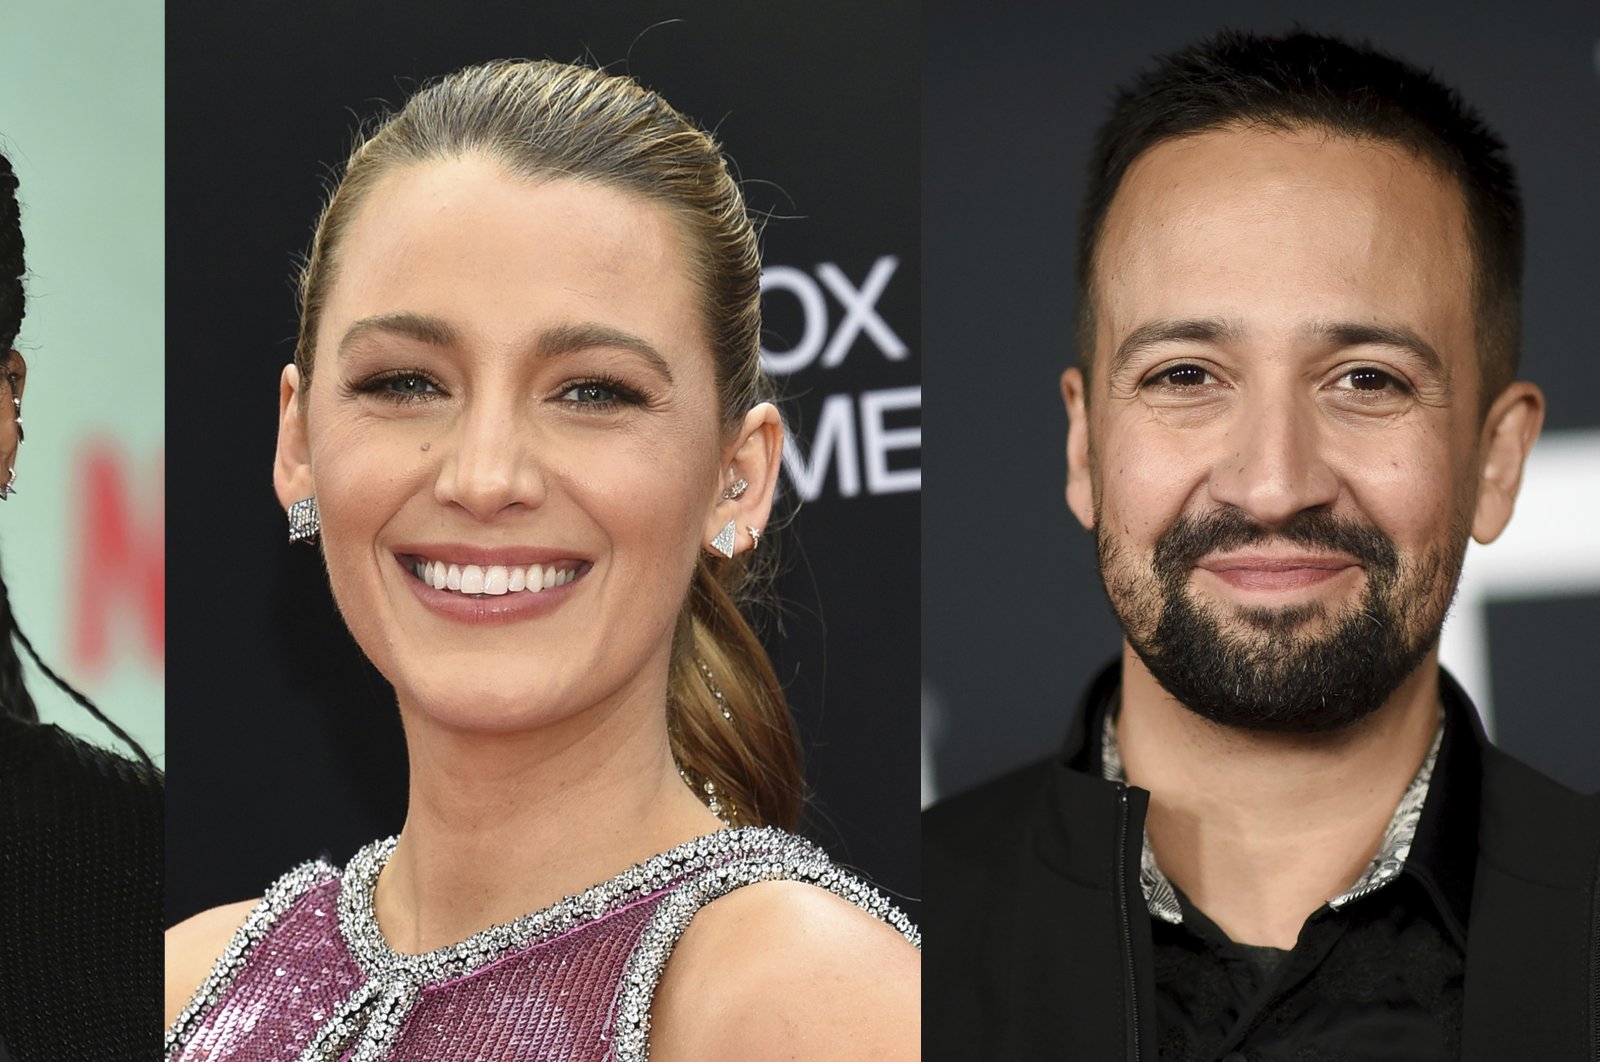 The combination of photos shows Regina King, Blake Lively, Lin-Manuel Miranda and Ryan Reynolds who will serve as co-chairs of the Met Gala, returning to its traditional berth on the first Monday in May. (AP Photo)